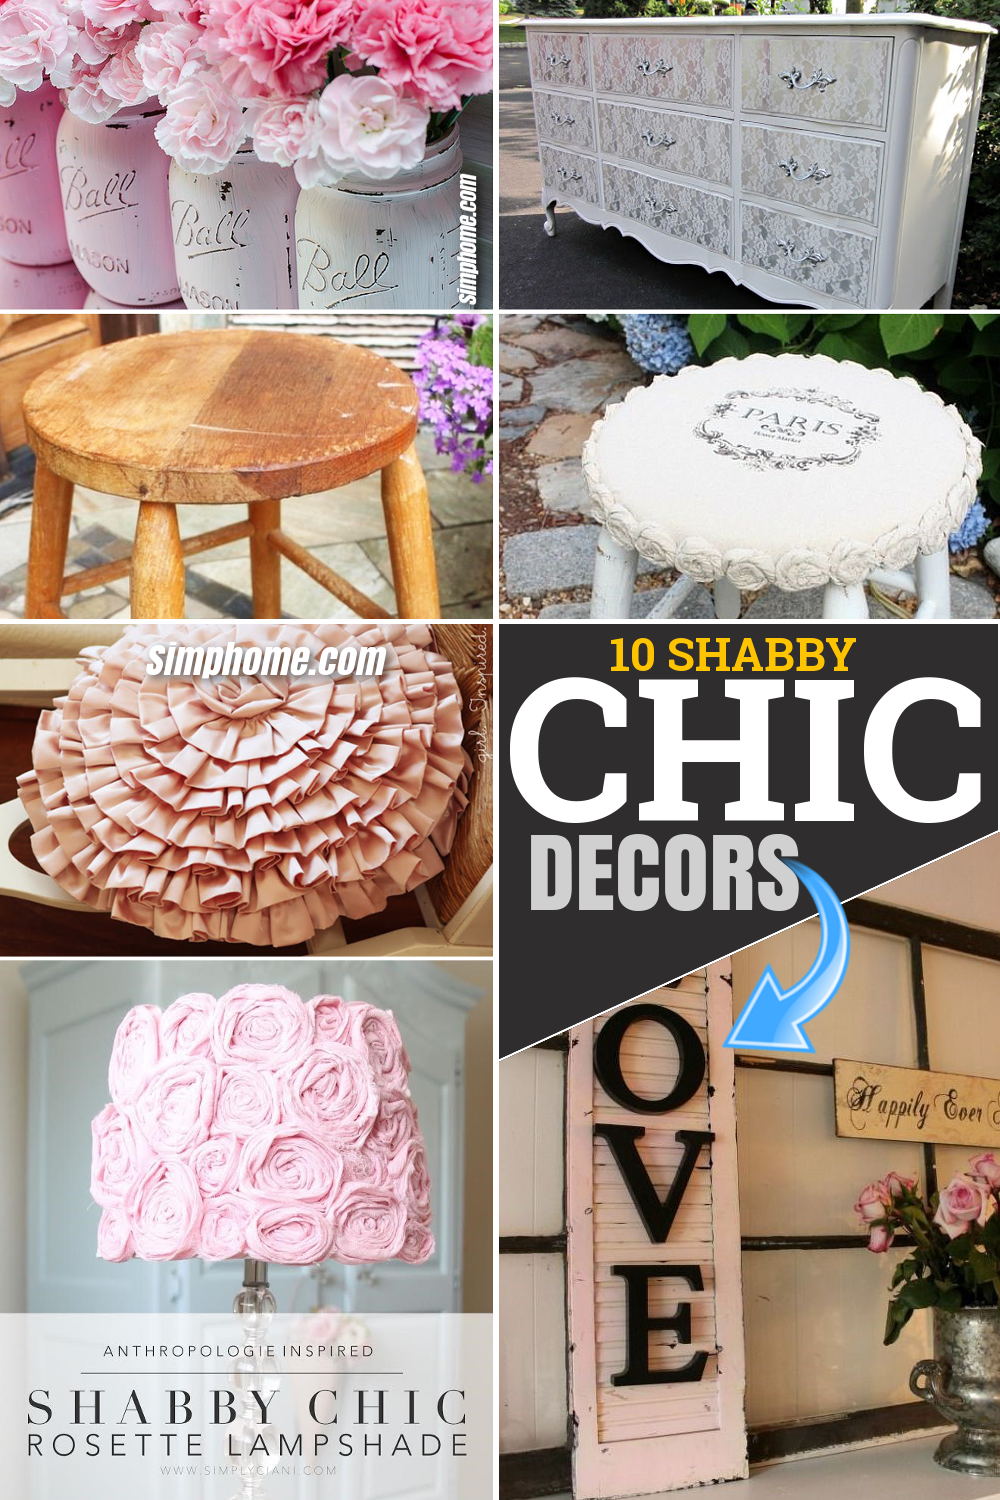 10 DIY Shabby Chic Decor Pieces for Any Corner of Your Room via Simphome.com Pinterest Featured Image